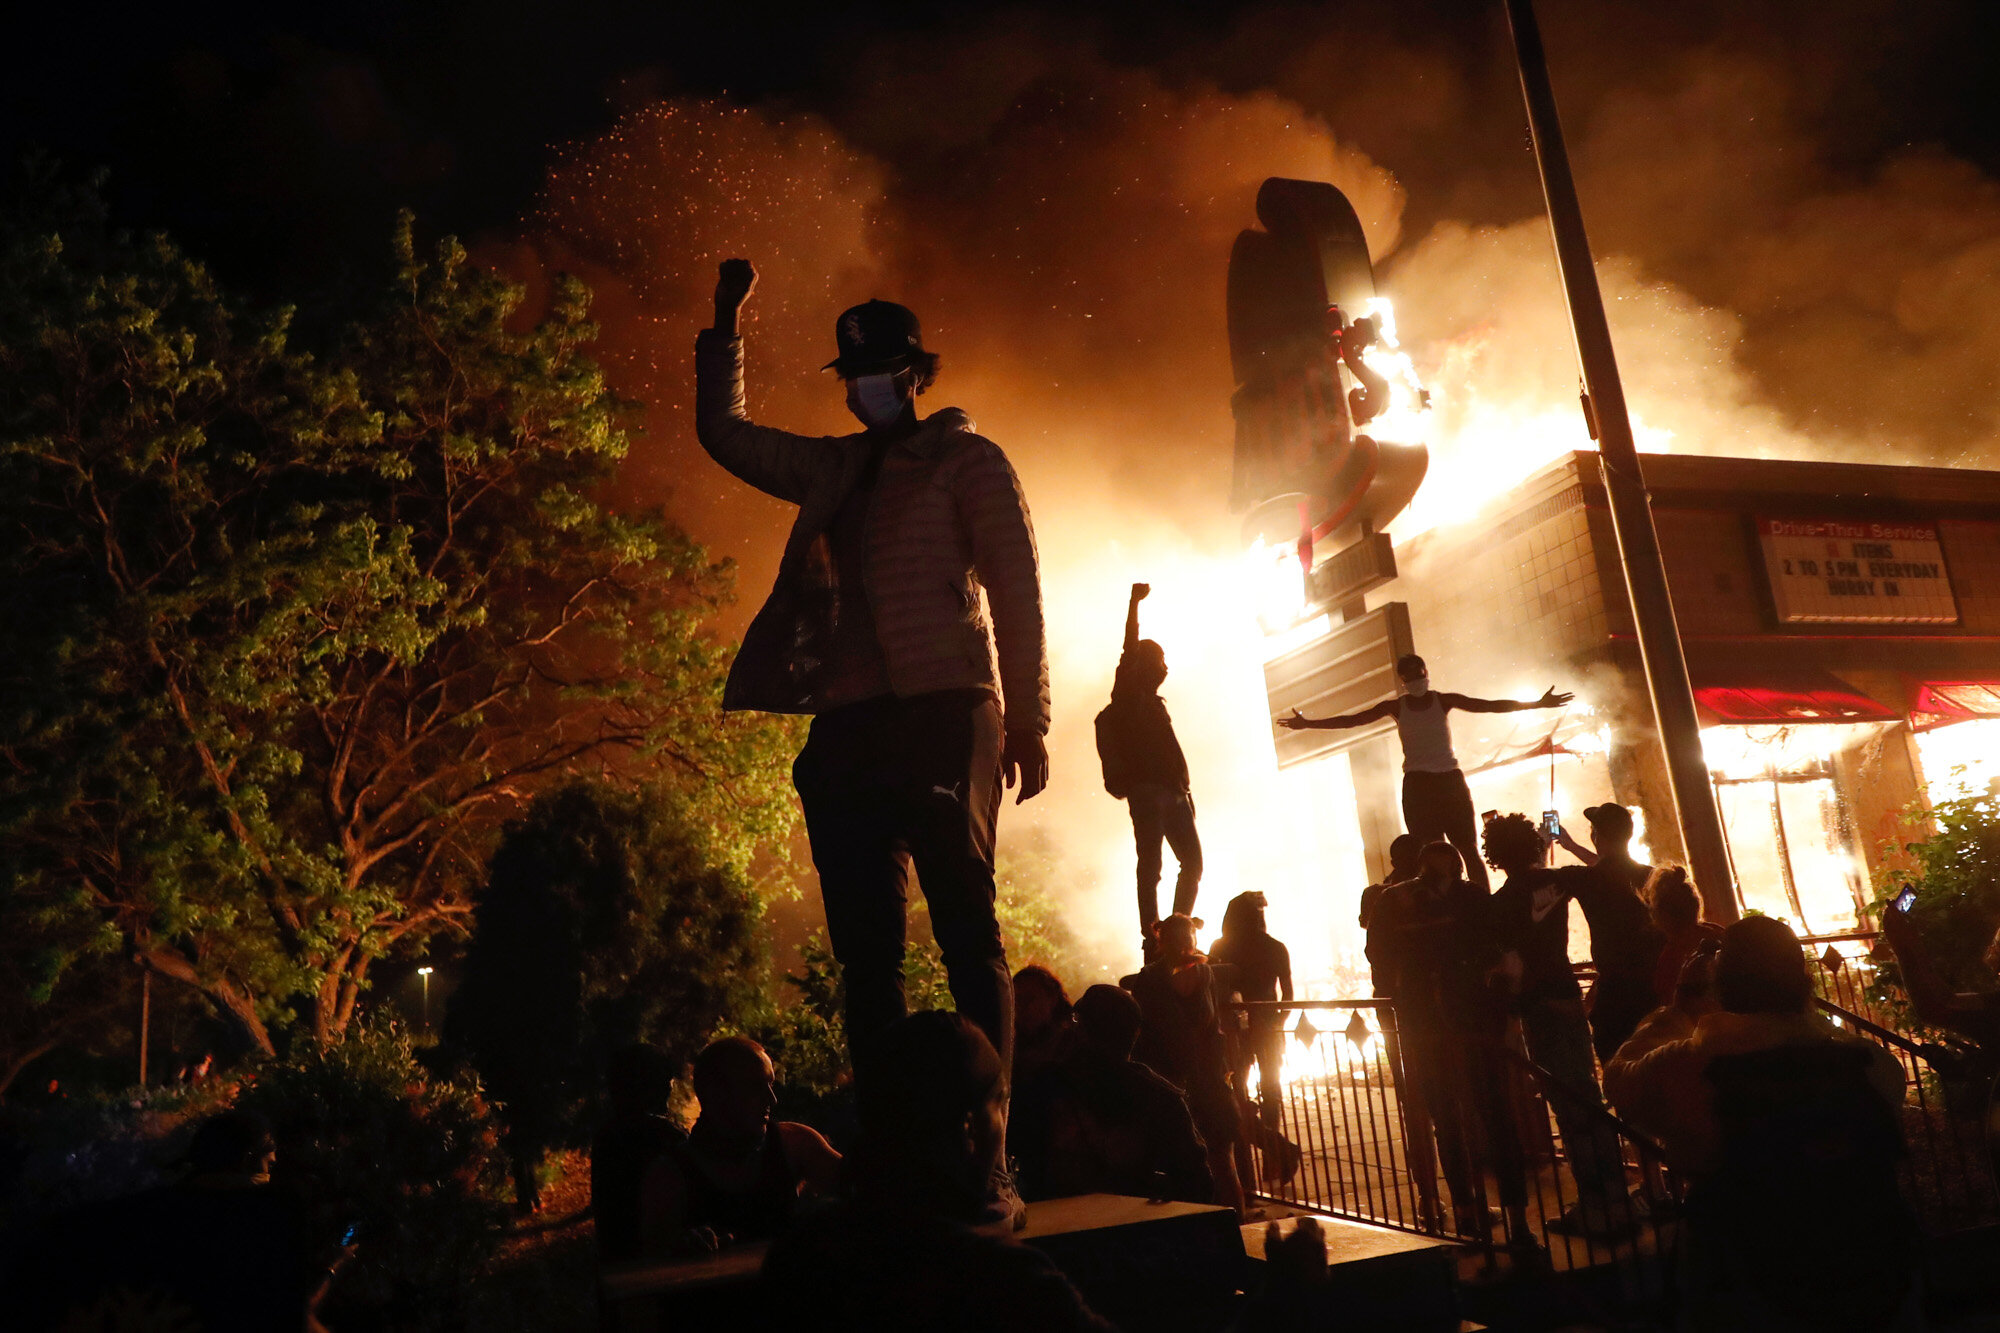  People demonstrate outside a burning Arby’s fast food restaurant on May 29, 2020, in Minneapolis during a protest over the death of George Floyd, a Black man who died after a white Minneapolis police officer pressed a knee into his neck for several 